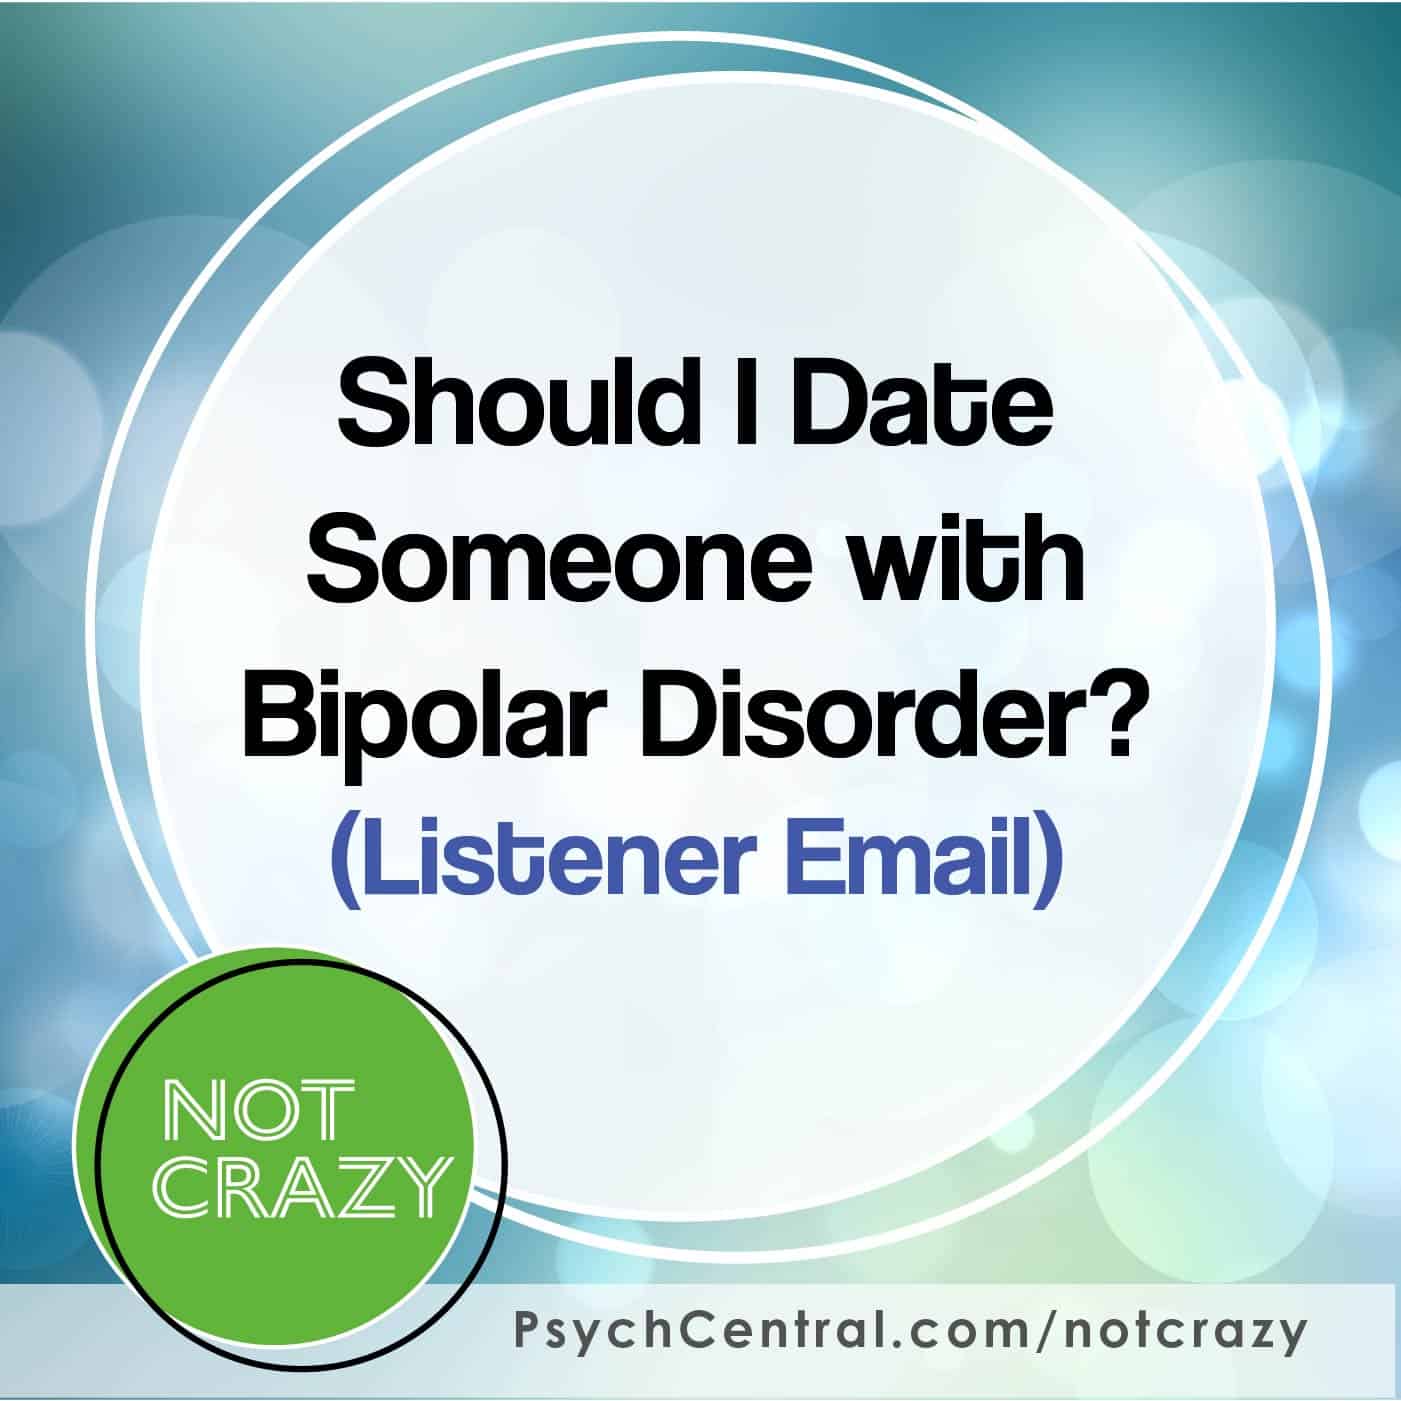 Should I Date Someone with Bipolar Disorder?